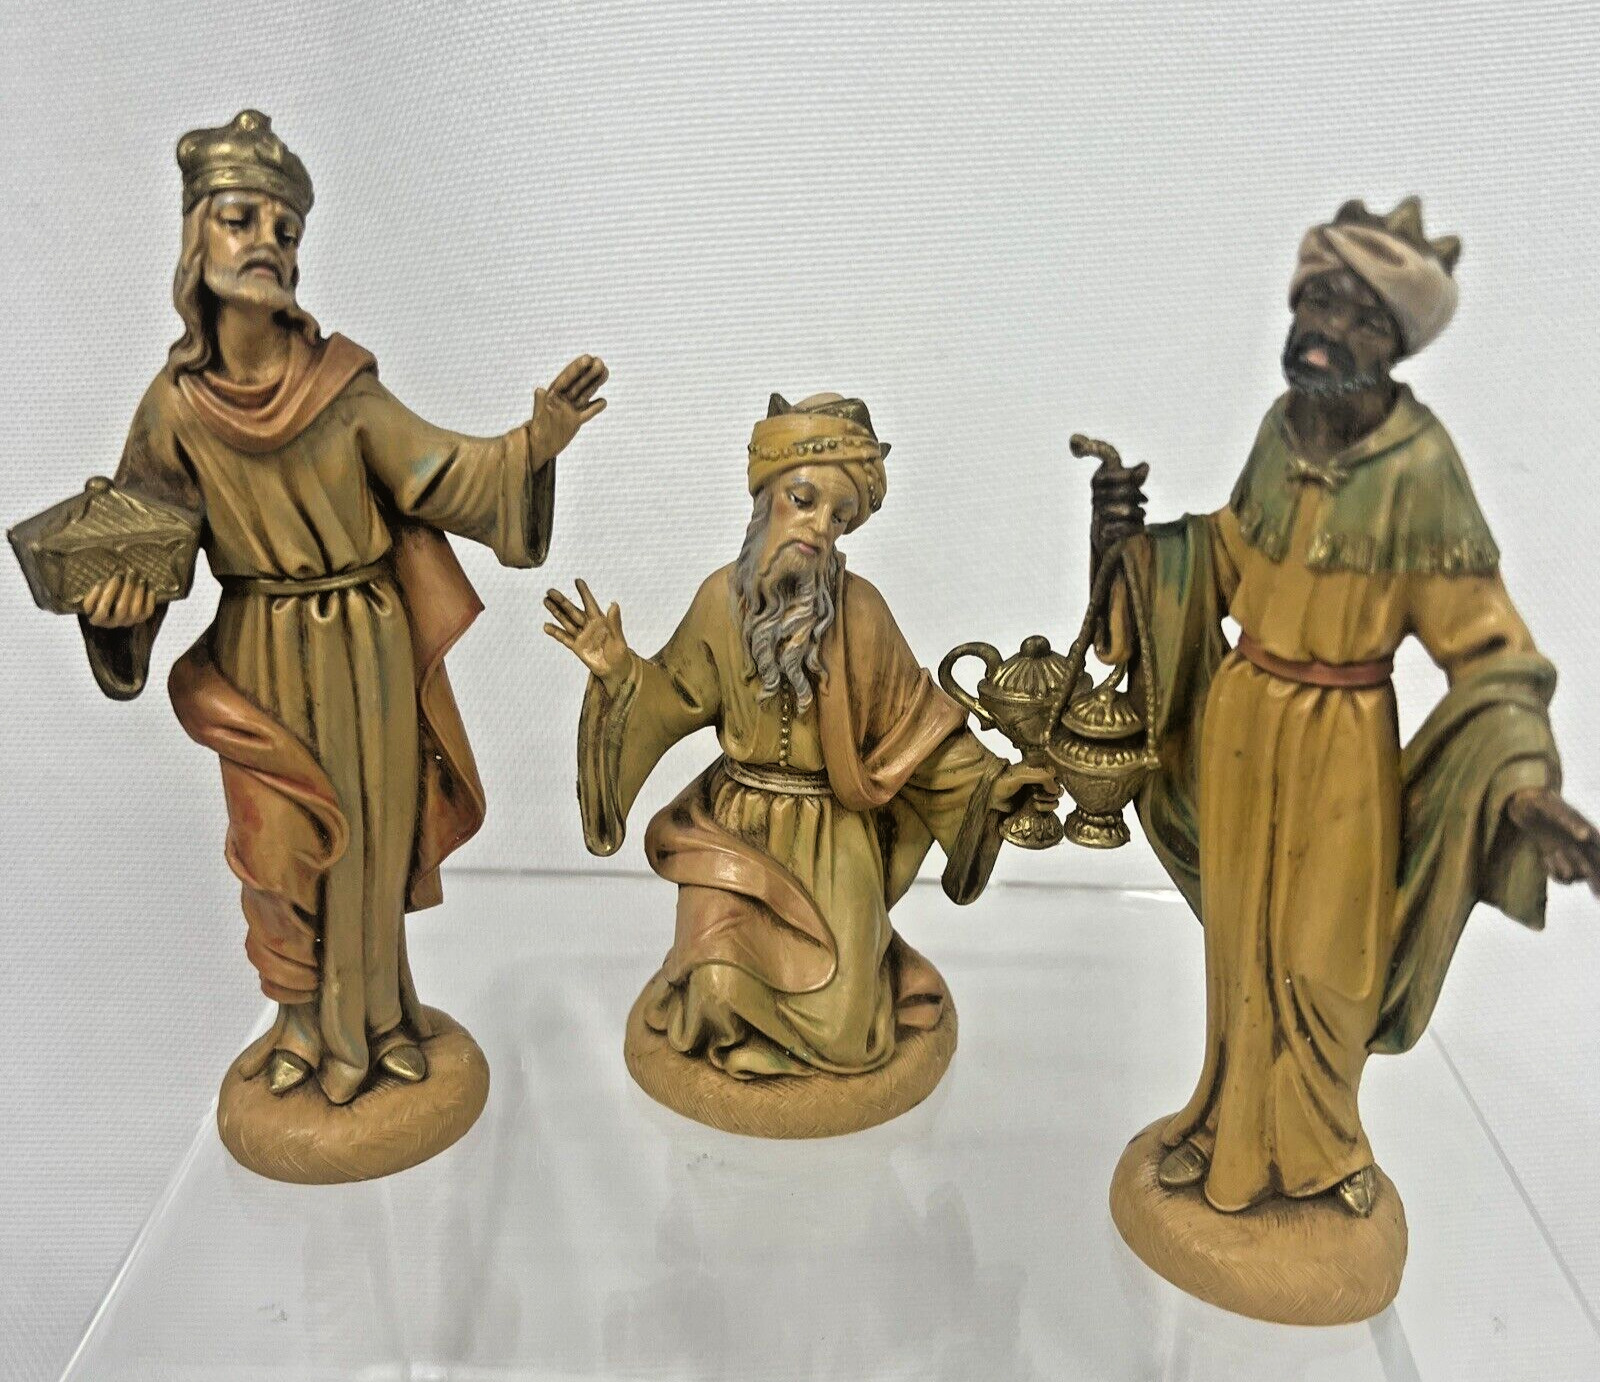 1983 Fontanini Nativity 5 inch The Three Wise Men 3 King Italy standing kneeling